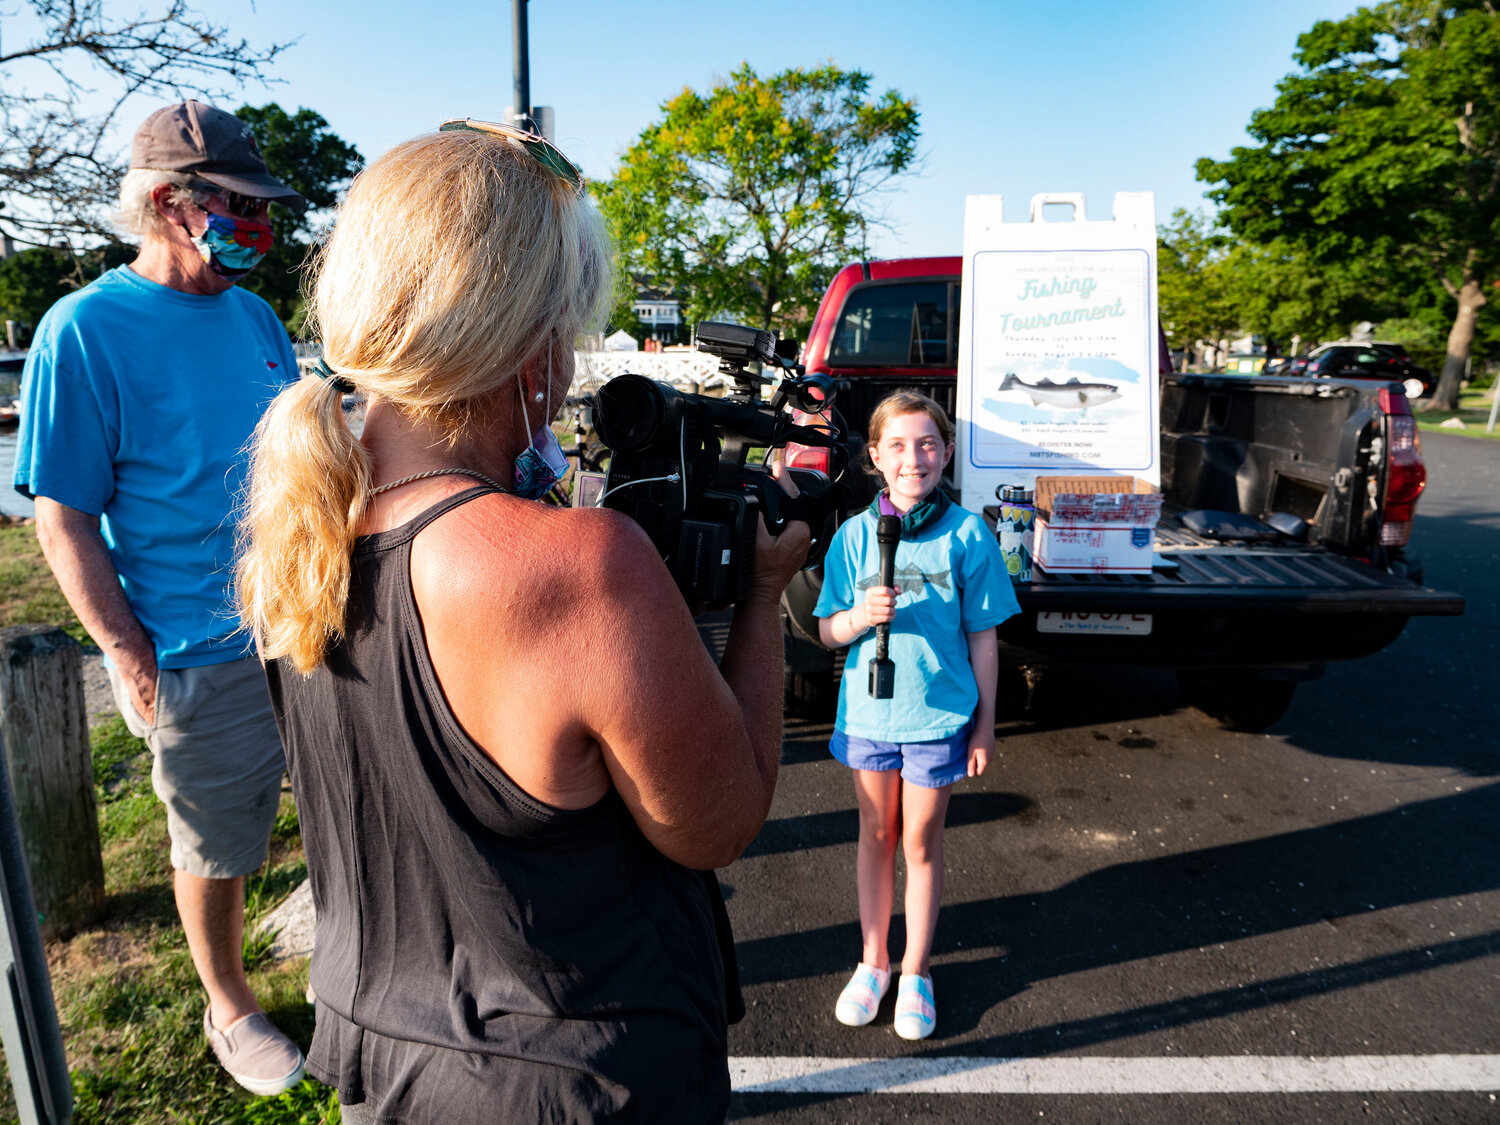 Lily Berkowitz, 10, interviewed by Liz Brown Swanson as part of a television documentary on the history of the Manchester Fishing Tournament.  At this moment, she is telling the story of catching a 40-inch striped bass with her grandfather, David Baer.  A true angler, she withheld the exact location of her catch.